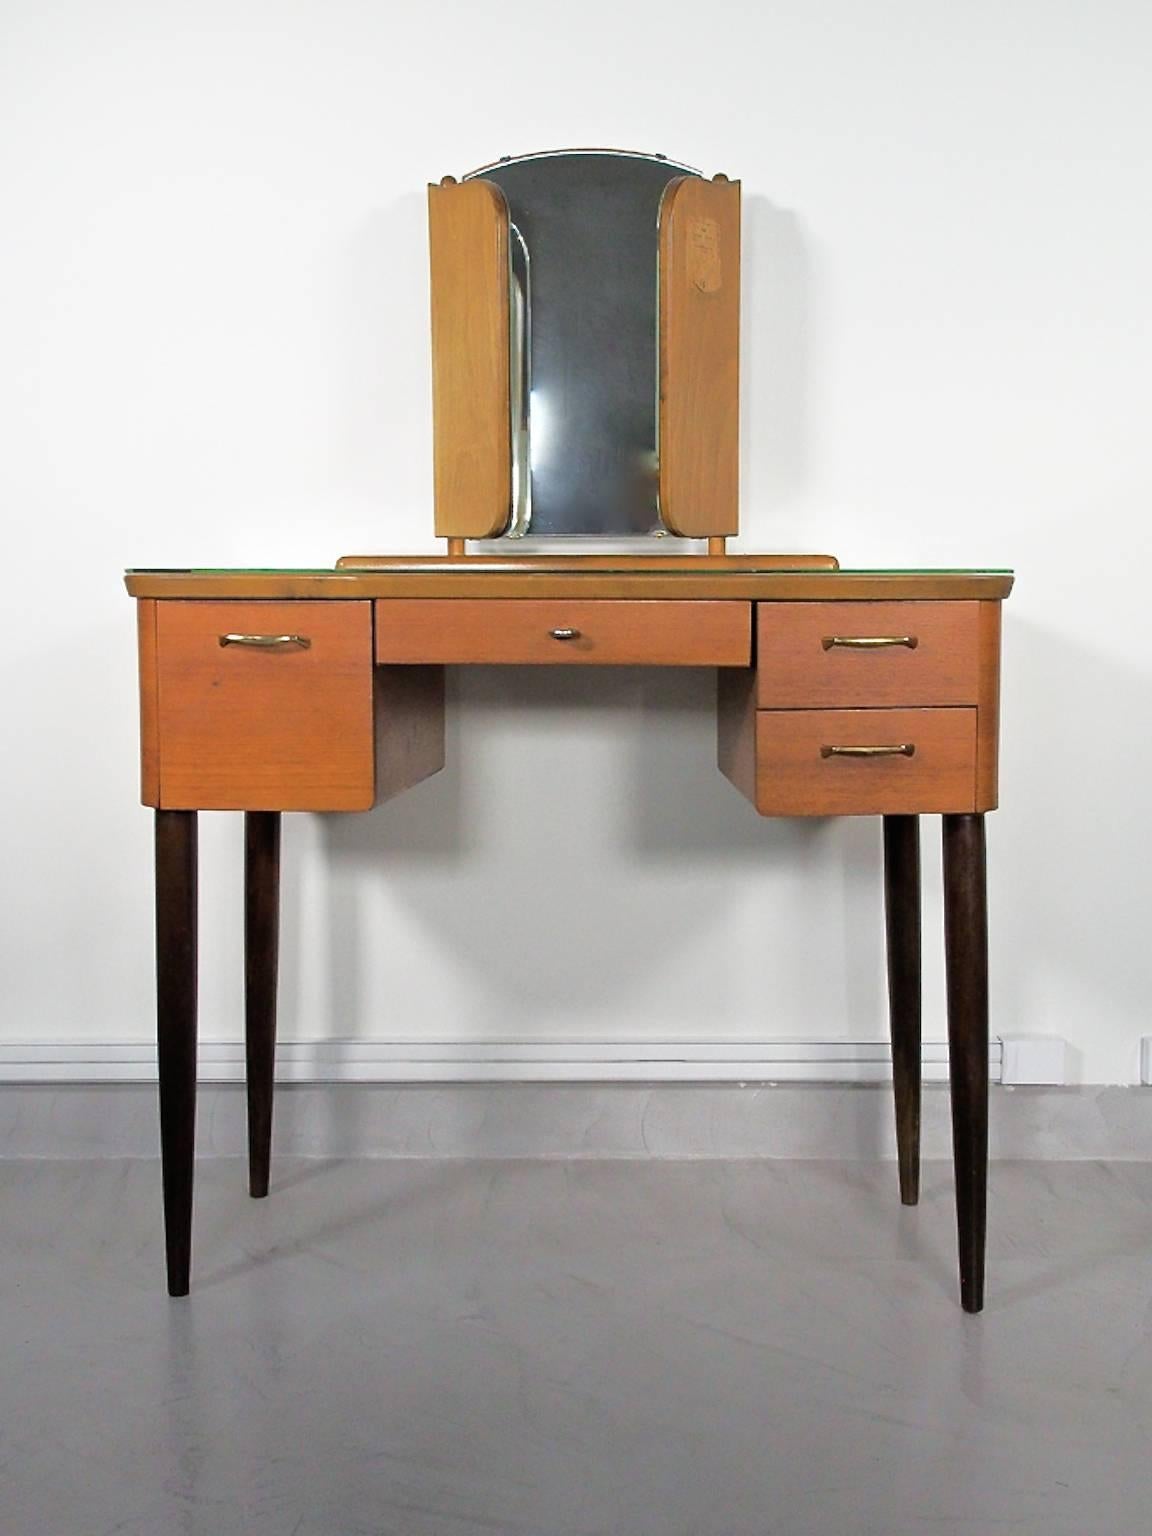 Beautiful Mid-Century Modern teak dressing table with angled mirror and glass top. Drawers in the front. Round stained wood legs. Manufactured in Sweden by Fröseke AB.